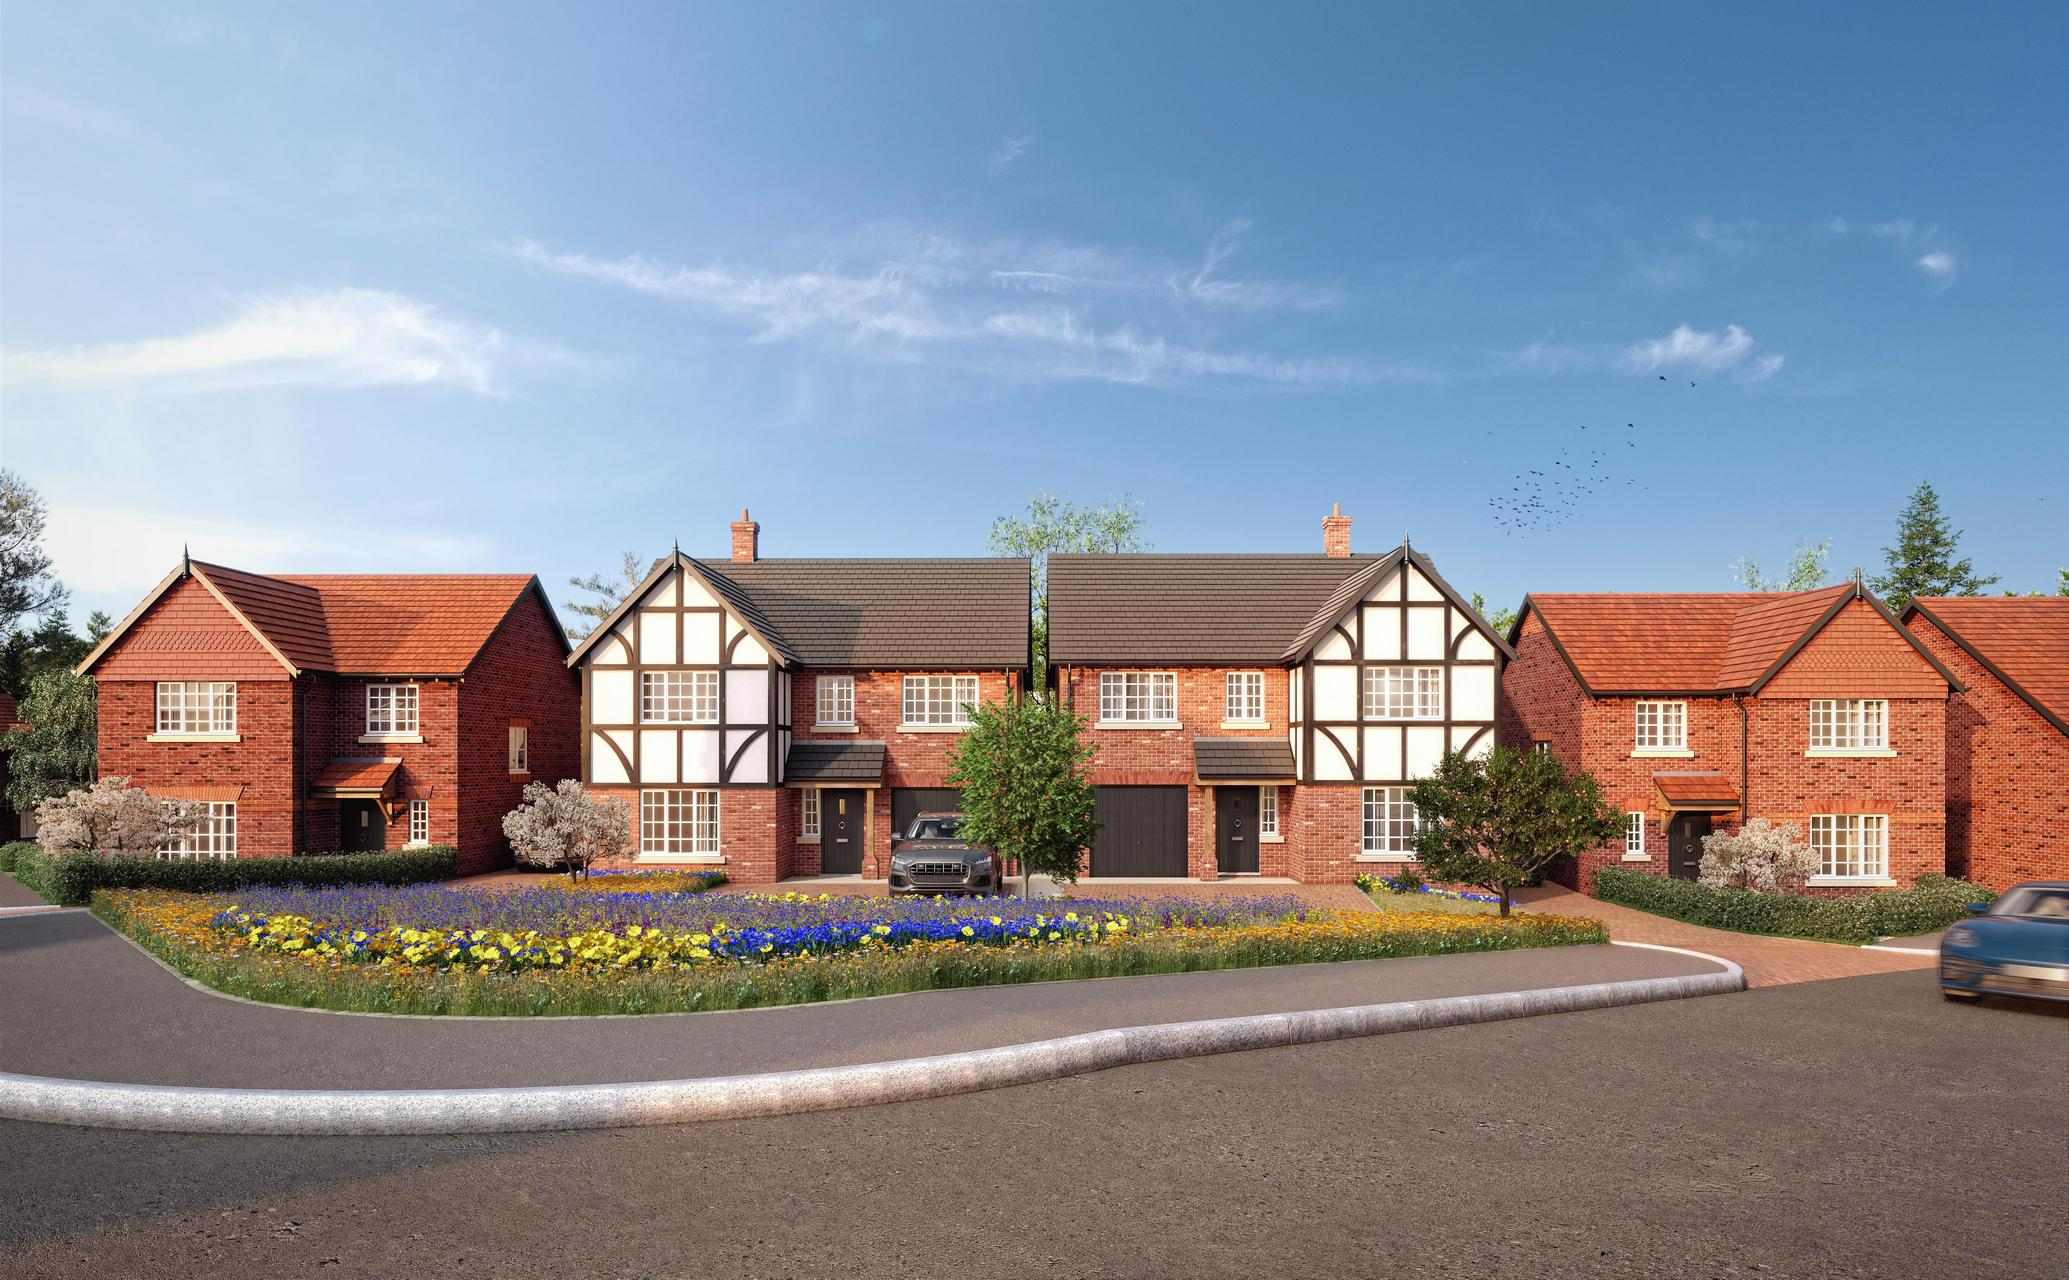 More Planning Success for Wain Homes West Midlands